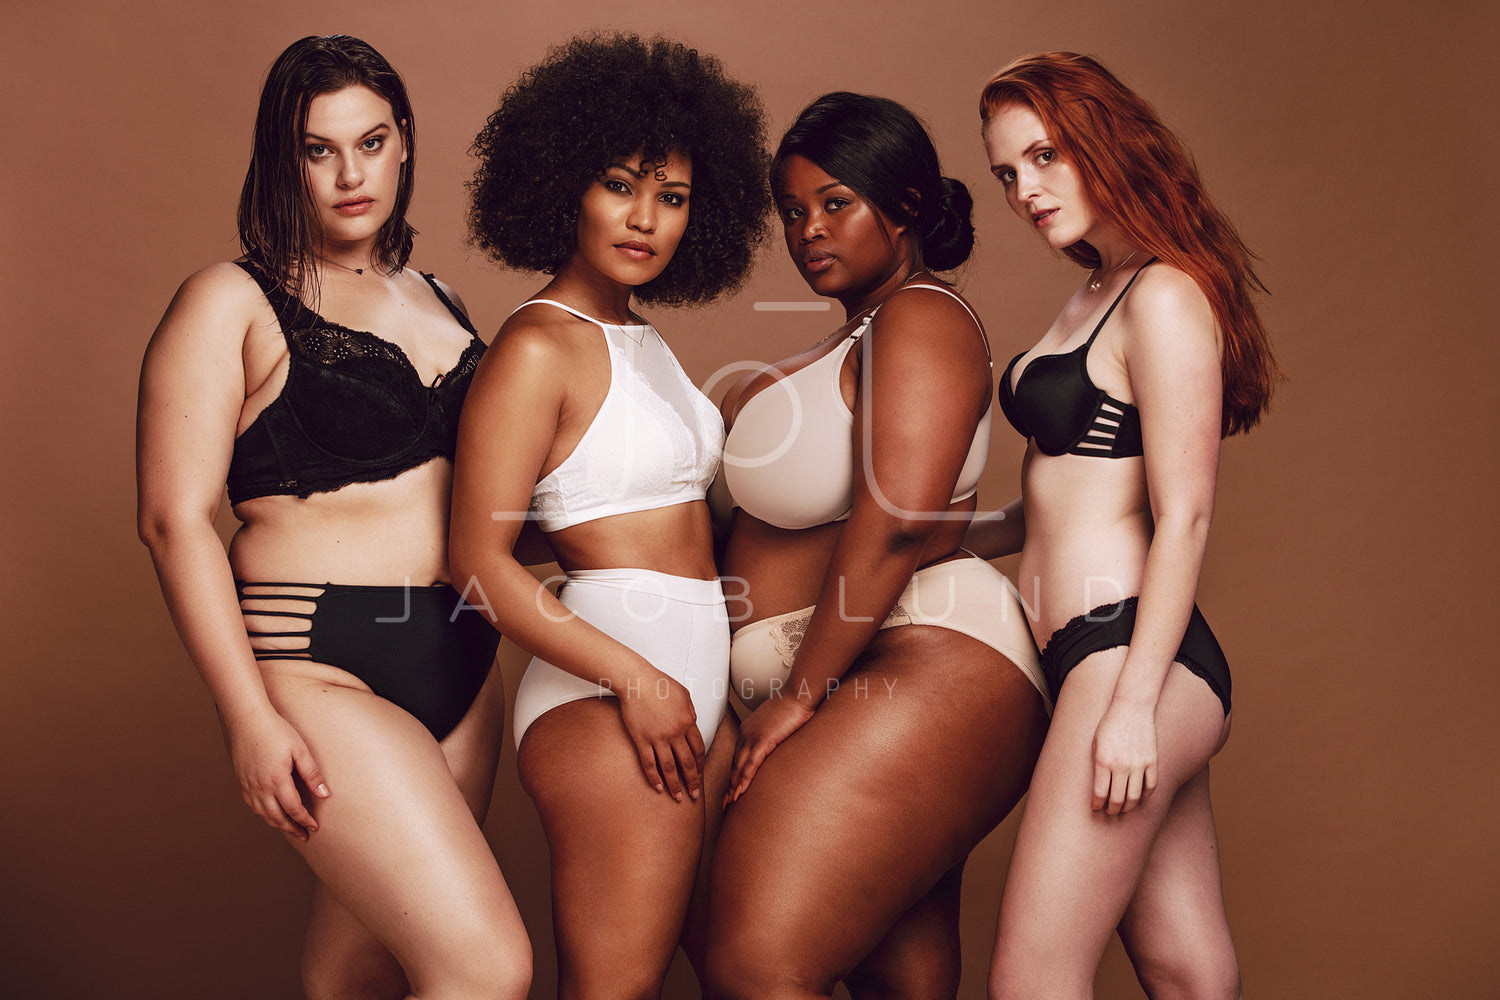 Proud group of women in lingerie posing together – Jacob Lund Photography  Store- premium stock photo